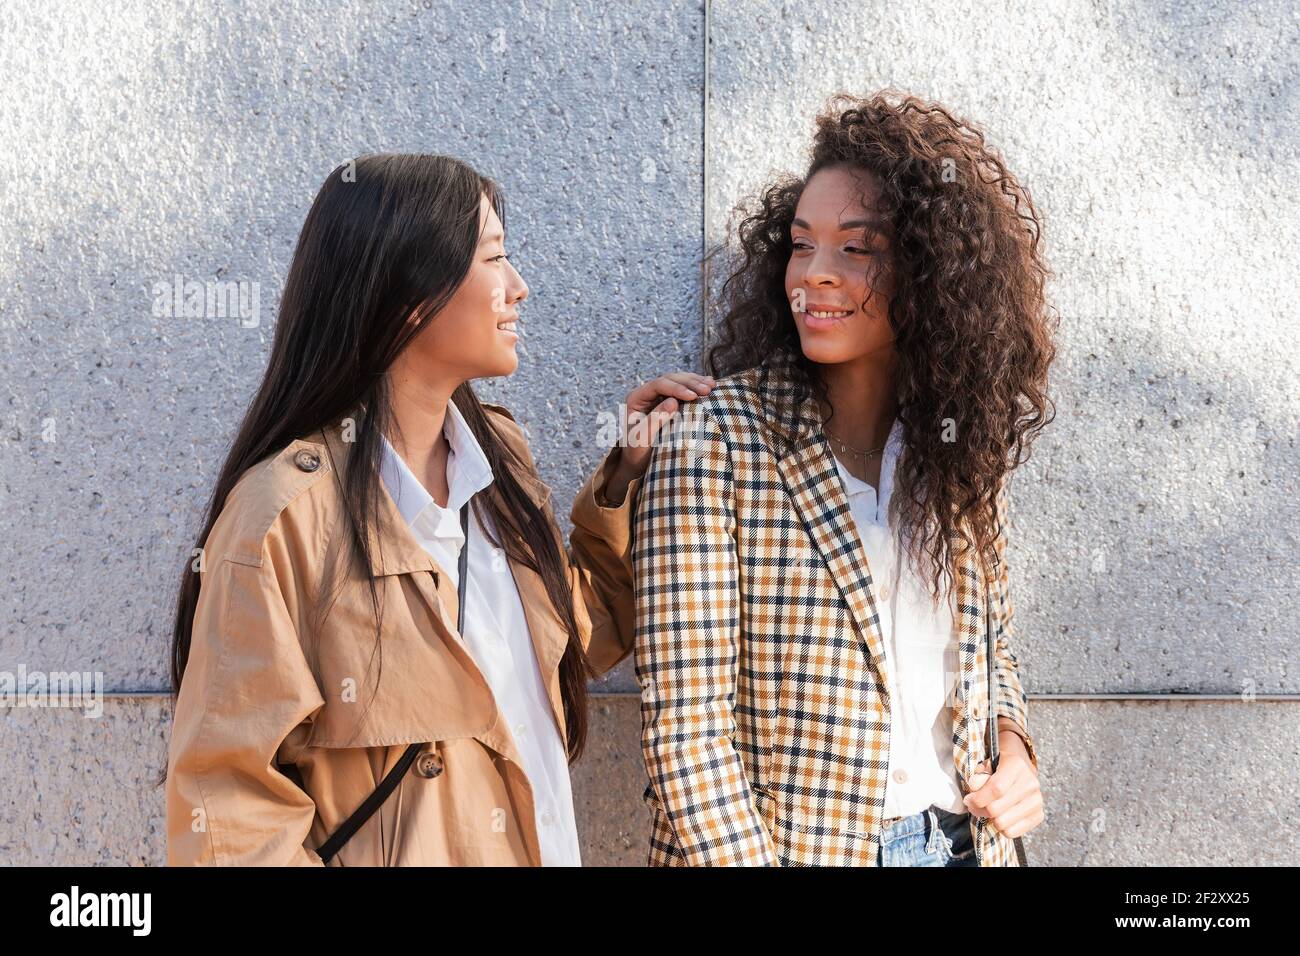 Young pensive women with long hair wearing trendy clothes standing on street and looking at each other Stock Photo